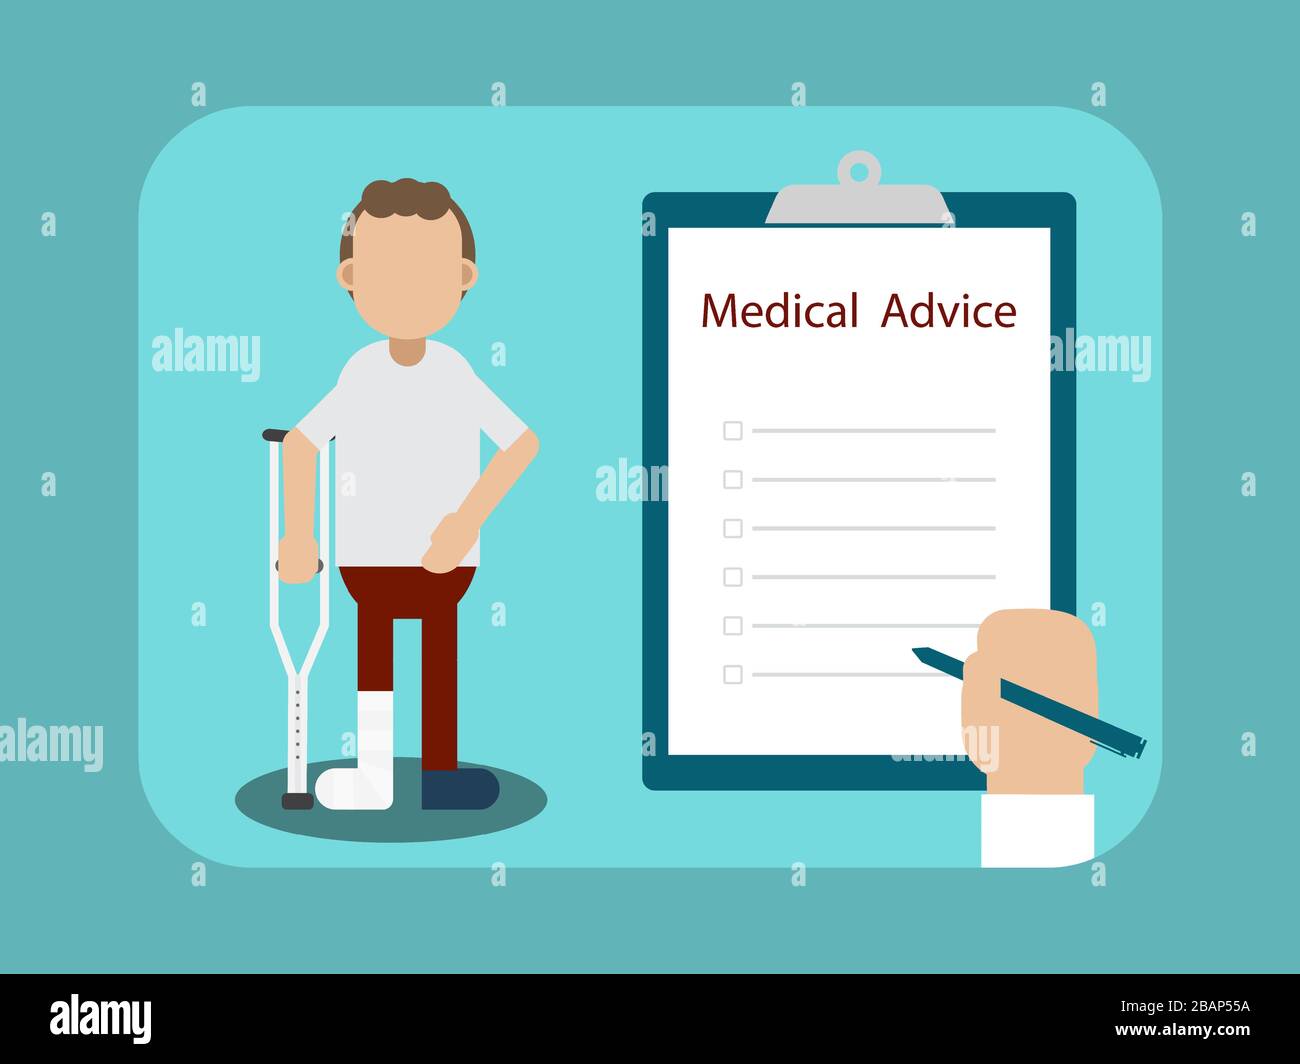 Medical advice for injured patient with hand on blank checklist vector illustration Stock Vector